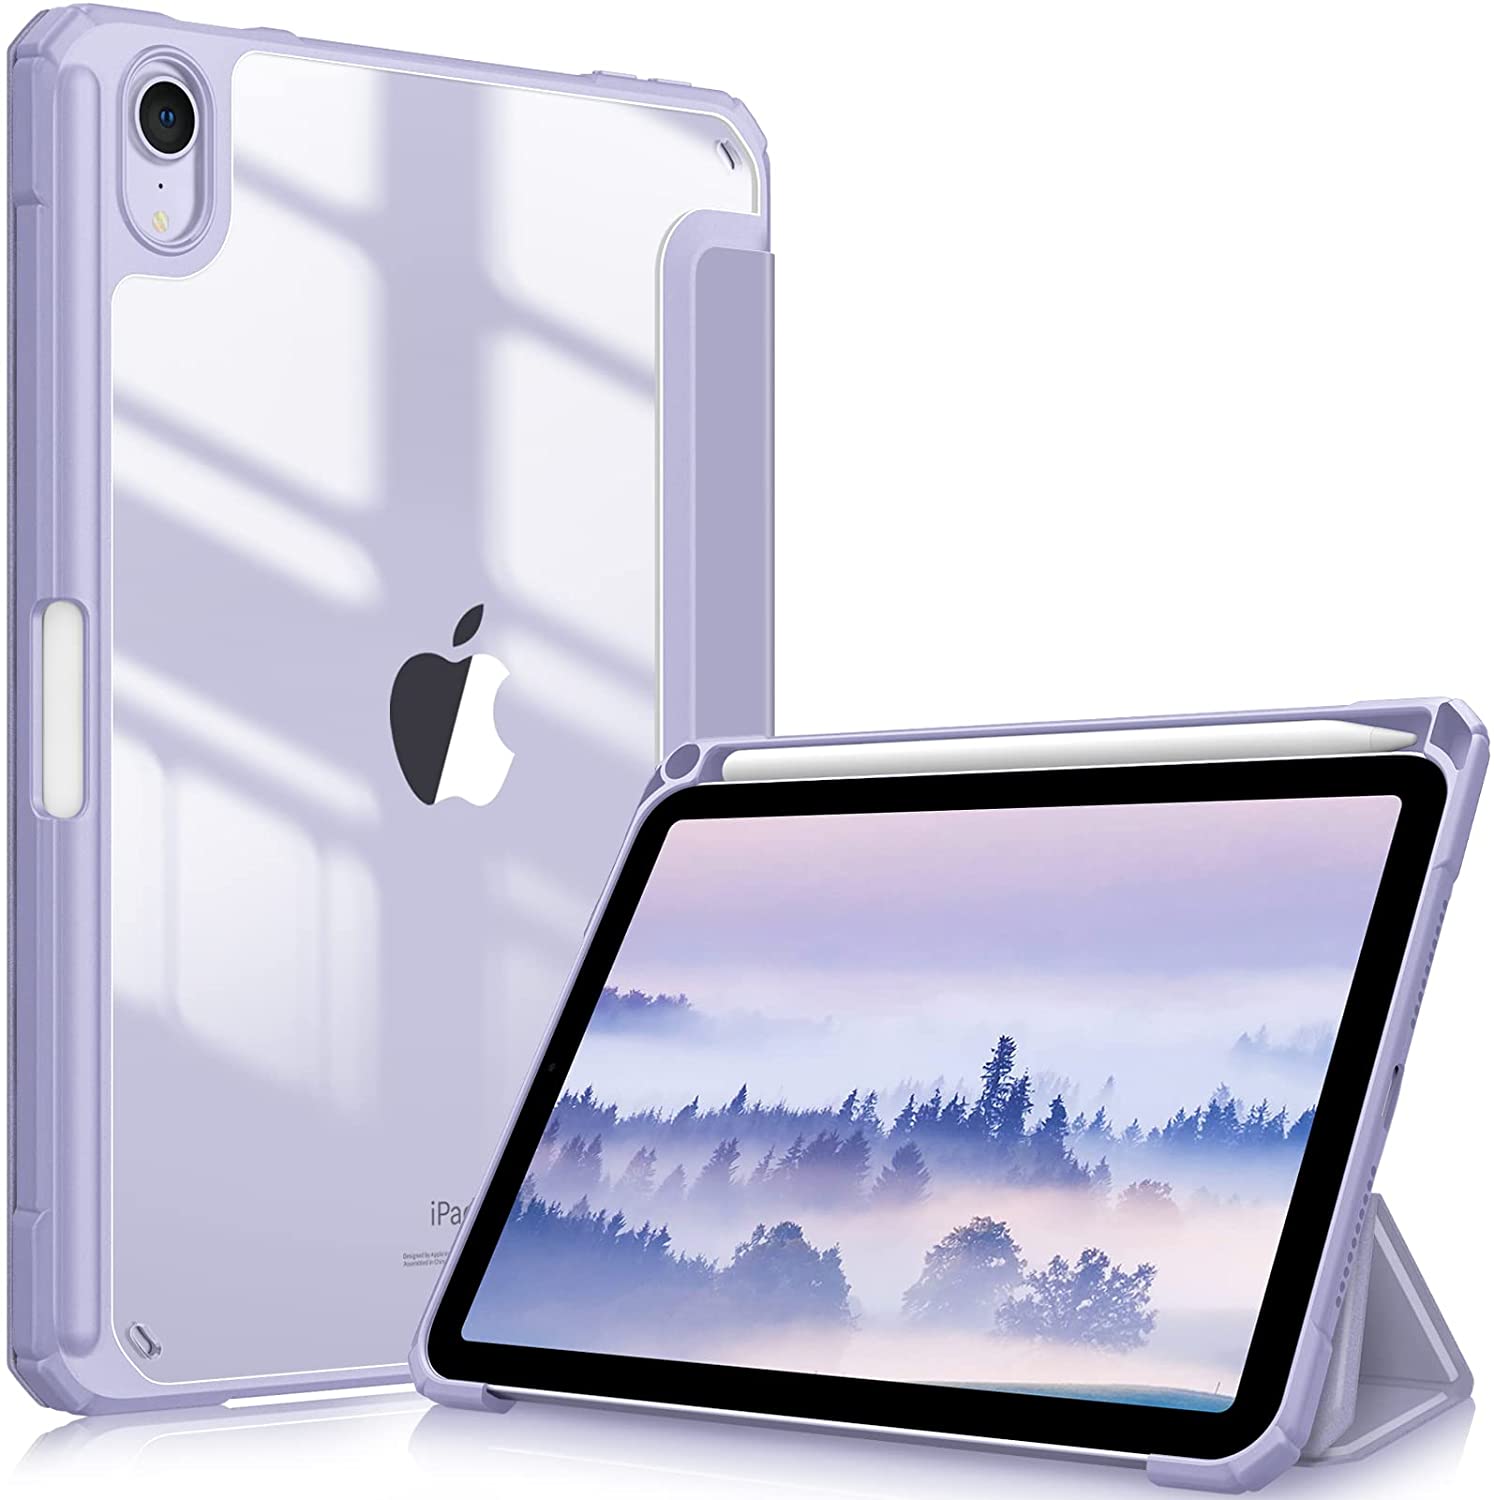 Fintie Hybrid Slim Case for iPad Mini 6 2021 (8.3 inch) - [Built-in Pencil Holder] Shockproof Cover Clear Transparent Back Shell, Auto Wake/Sleep